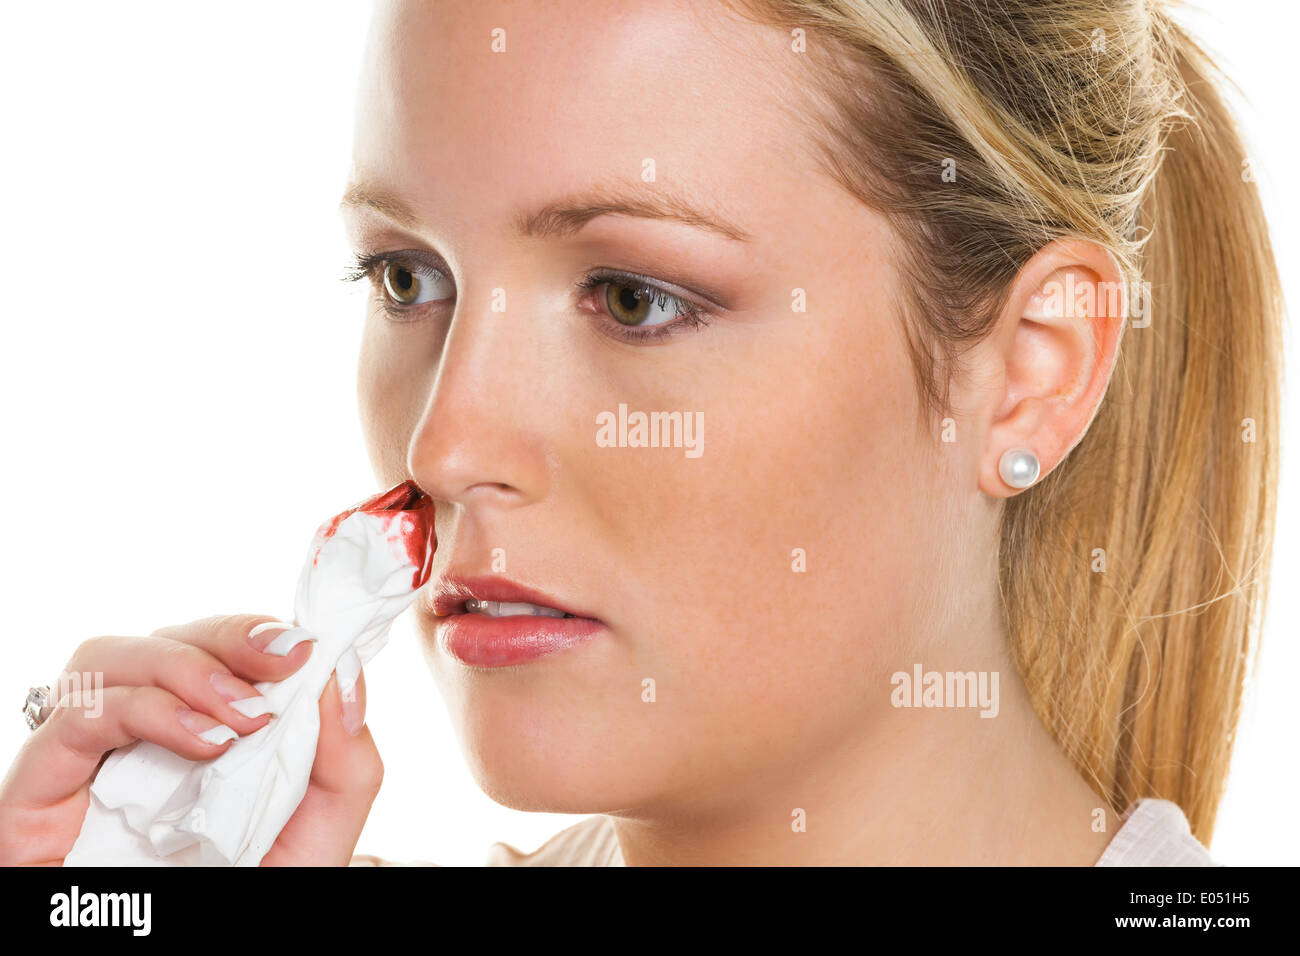 A young woman bleeds from her nose. Stops noses bleed with a handkerchief., Eine junge Frau blutet aus ihrer Nase. Stoppt Nasen Stock Photo